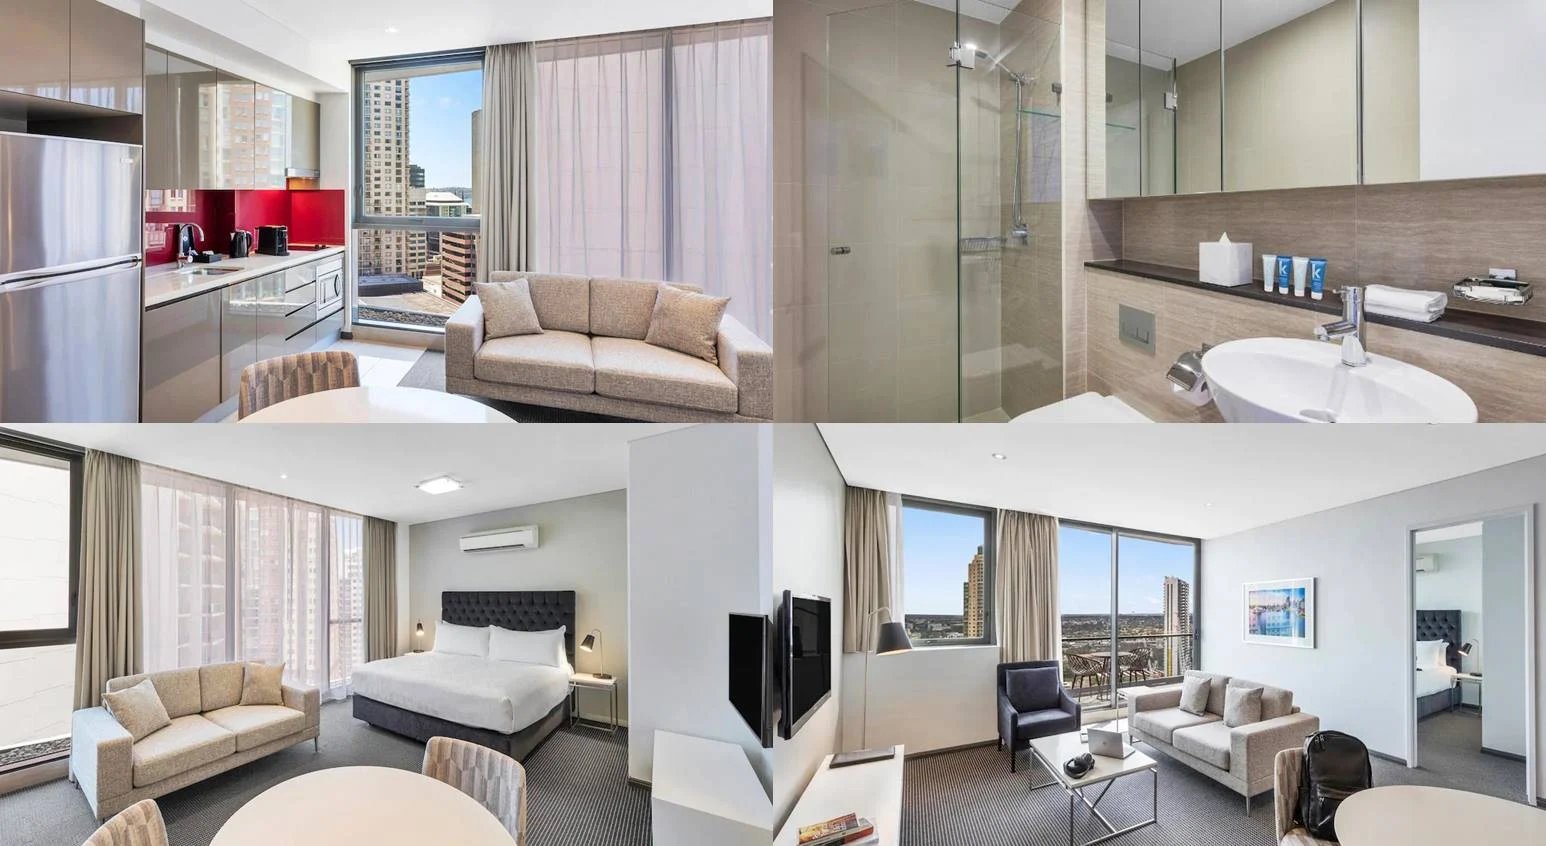 best-hotels-accommodation-apartments-motel-Sydney-city-cbd-darling-harbour-circular-quay-booking-deals-families-holiday-vacation-students-tourists-recommendation